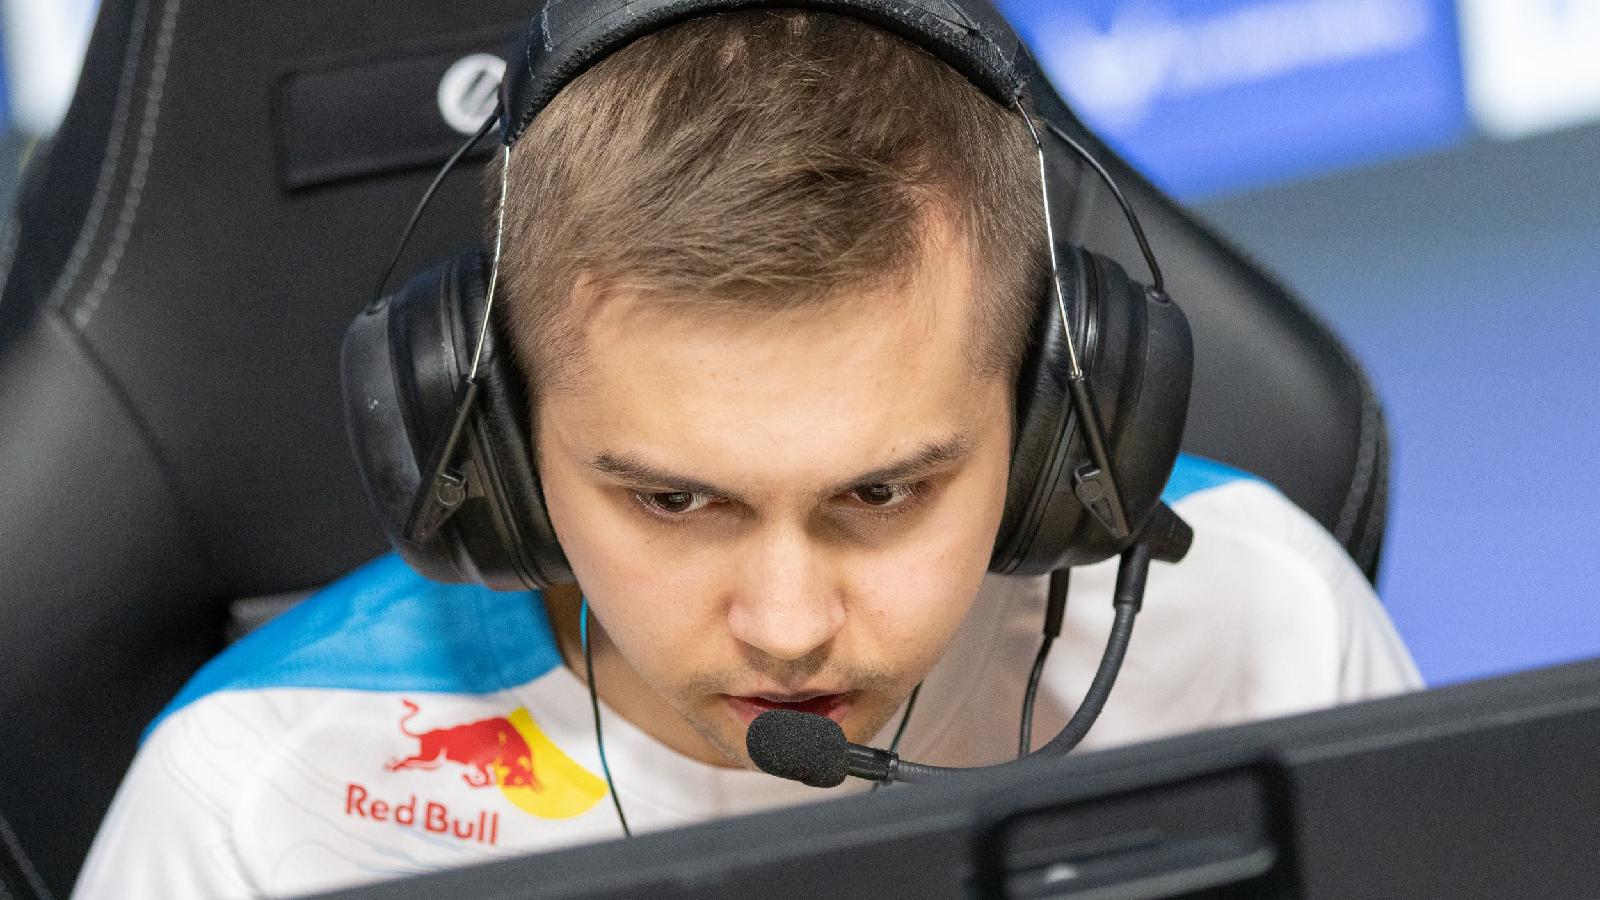 sh1ro, a CSGO pro playing for Cloud9